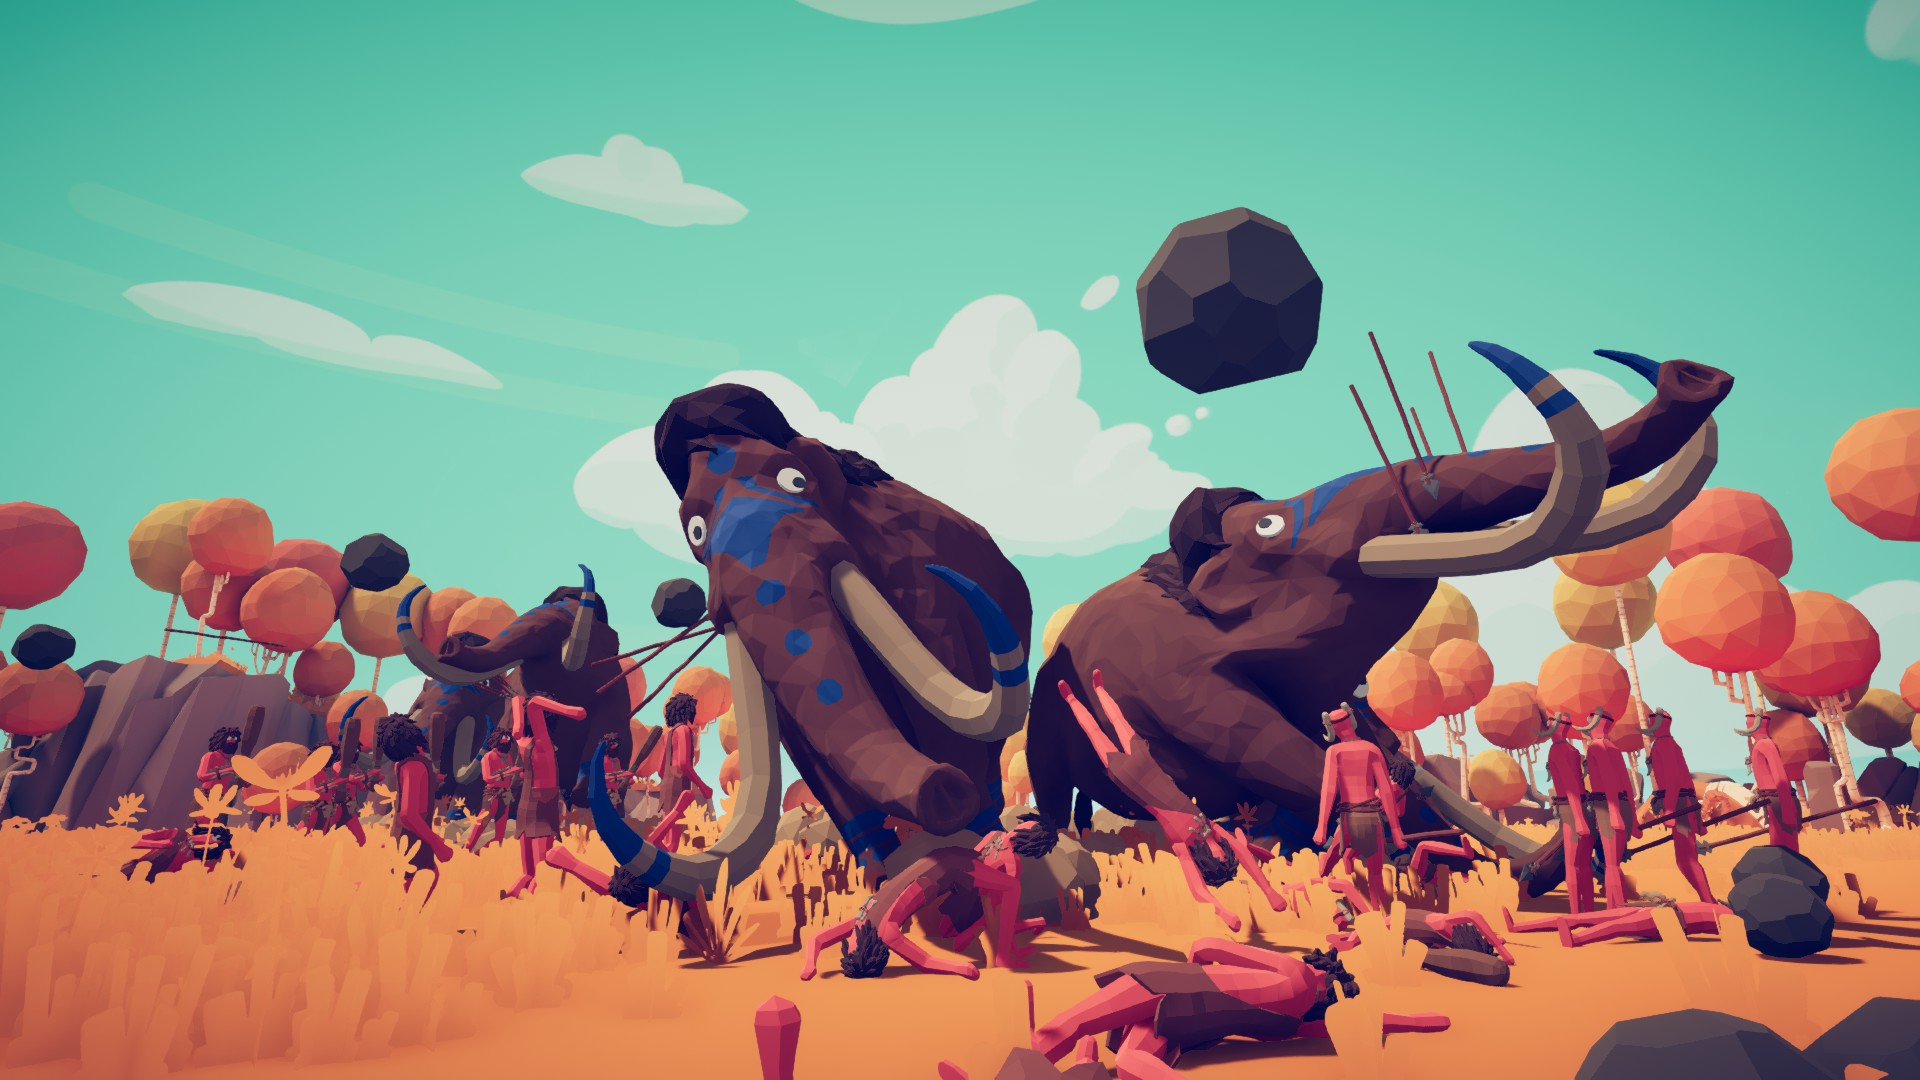 Find the best laptops for Totally Accurate Battle Simulator